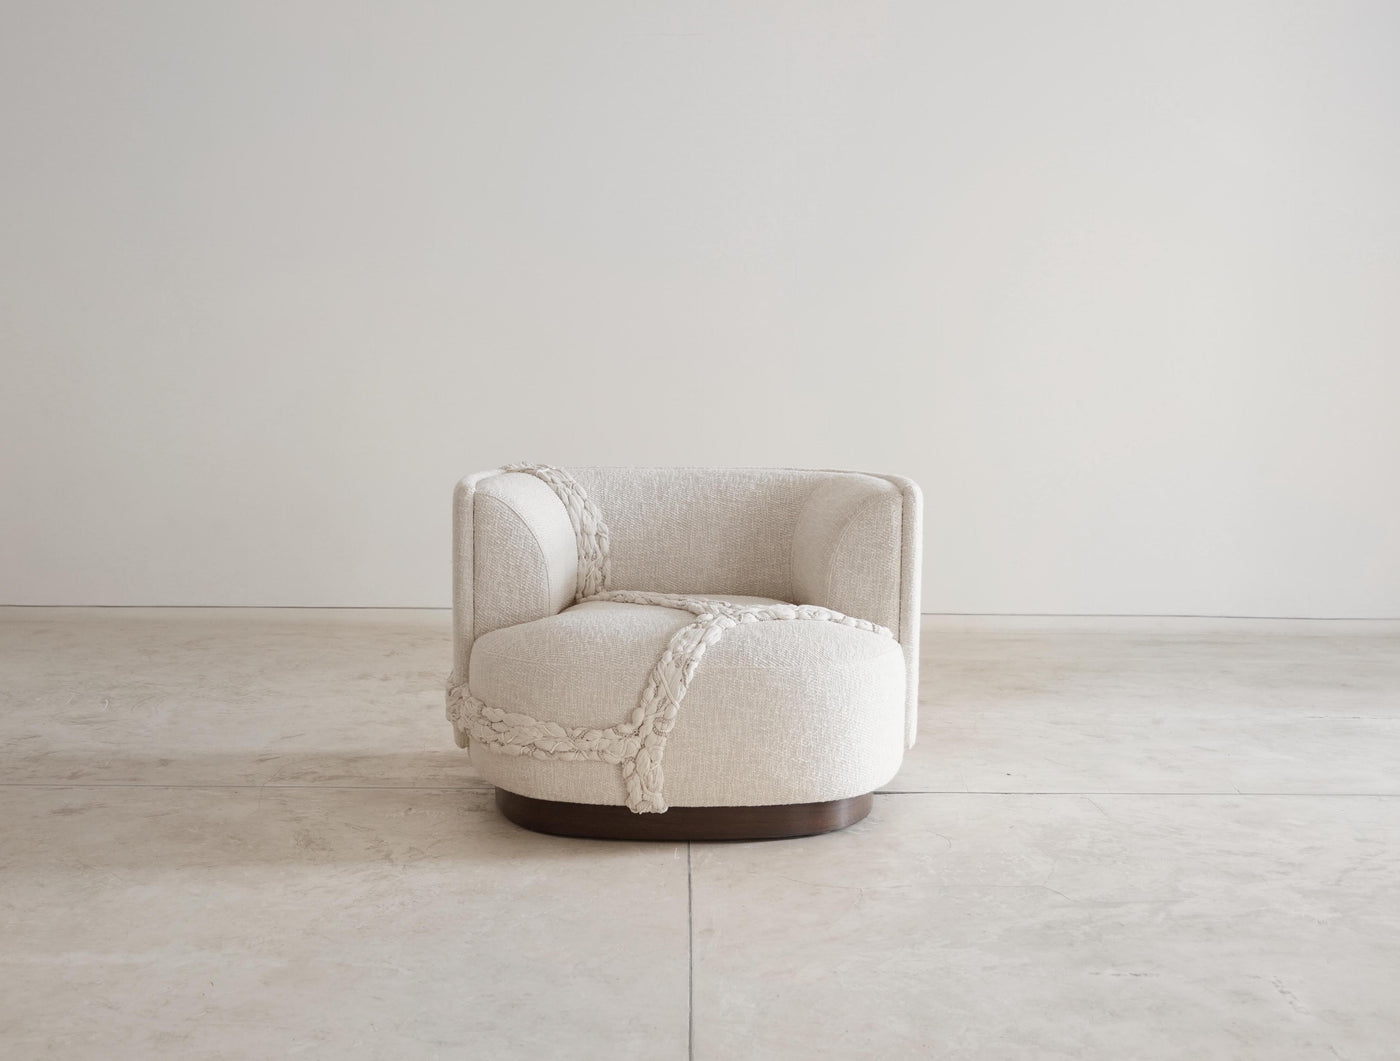 Pure cotton embroidered sofa, armchair and ottoman.